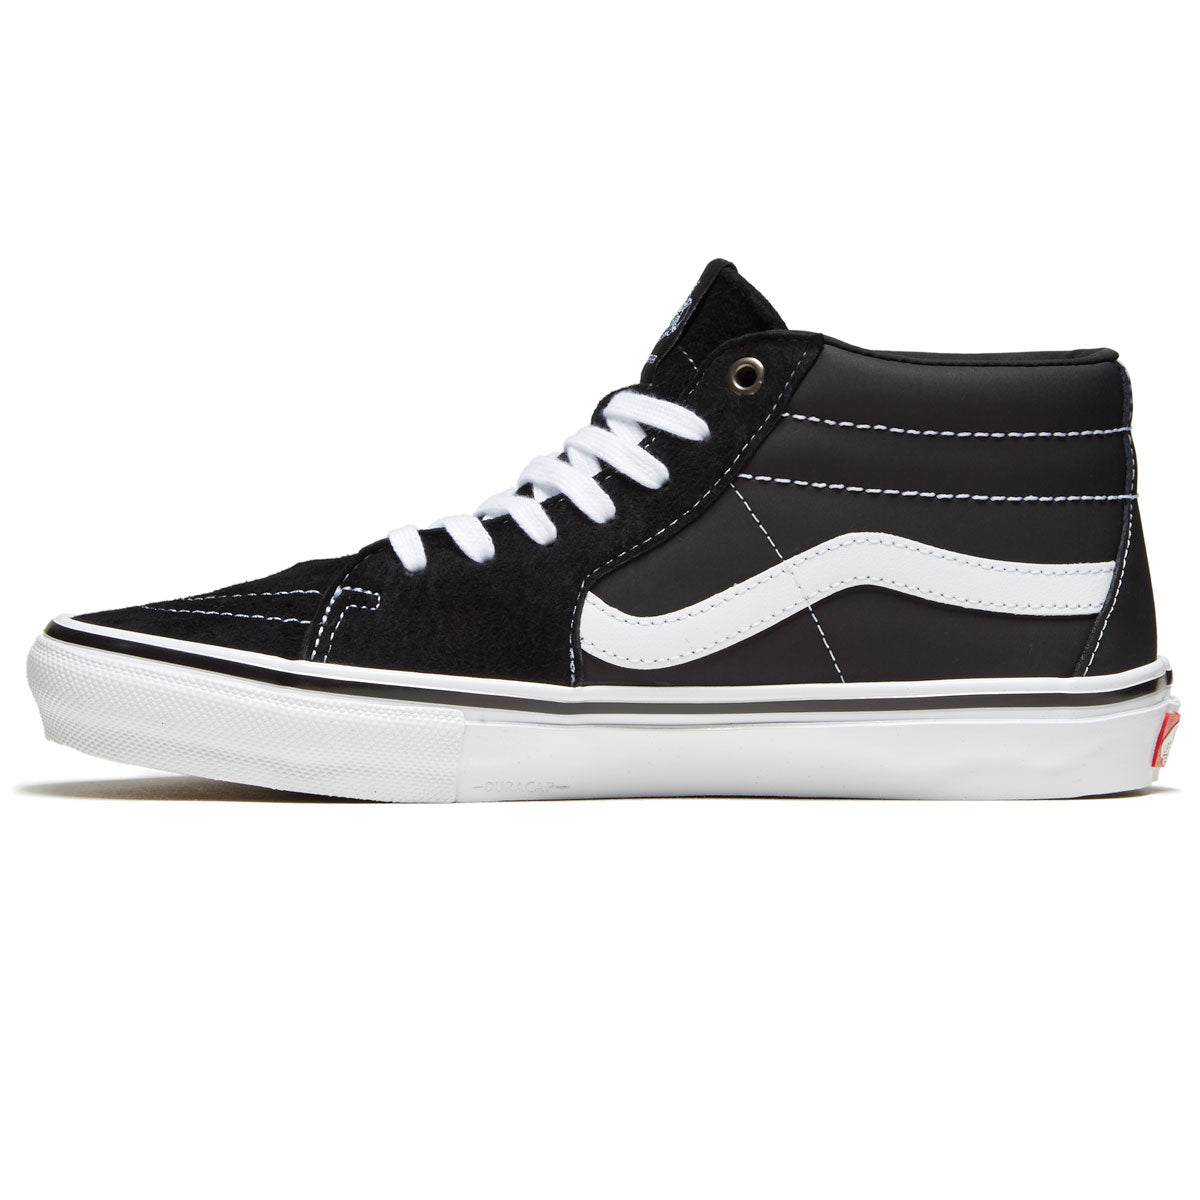 Vans Grosso Sk8 Mid Shoes - Black/White/Emo Leather image 2